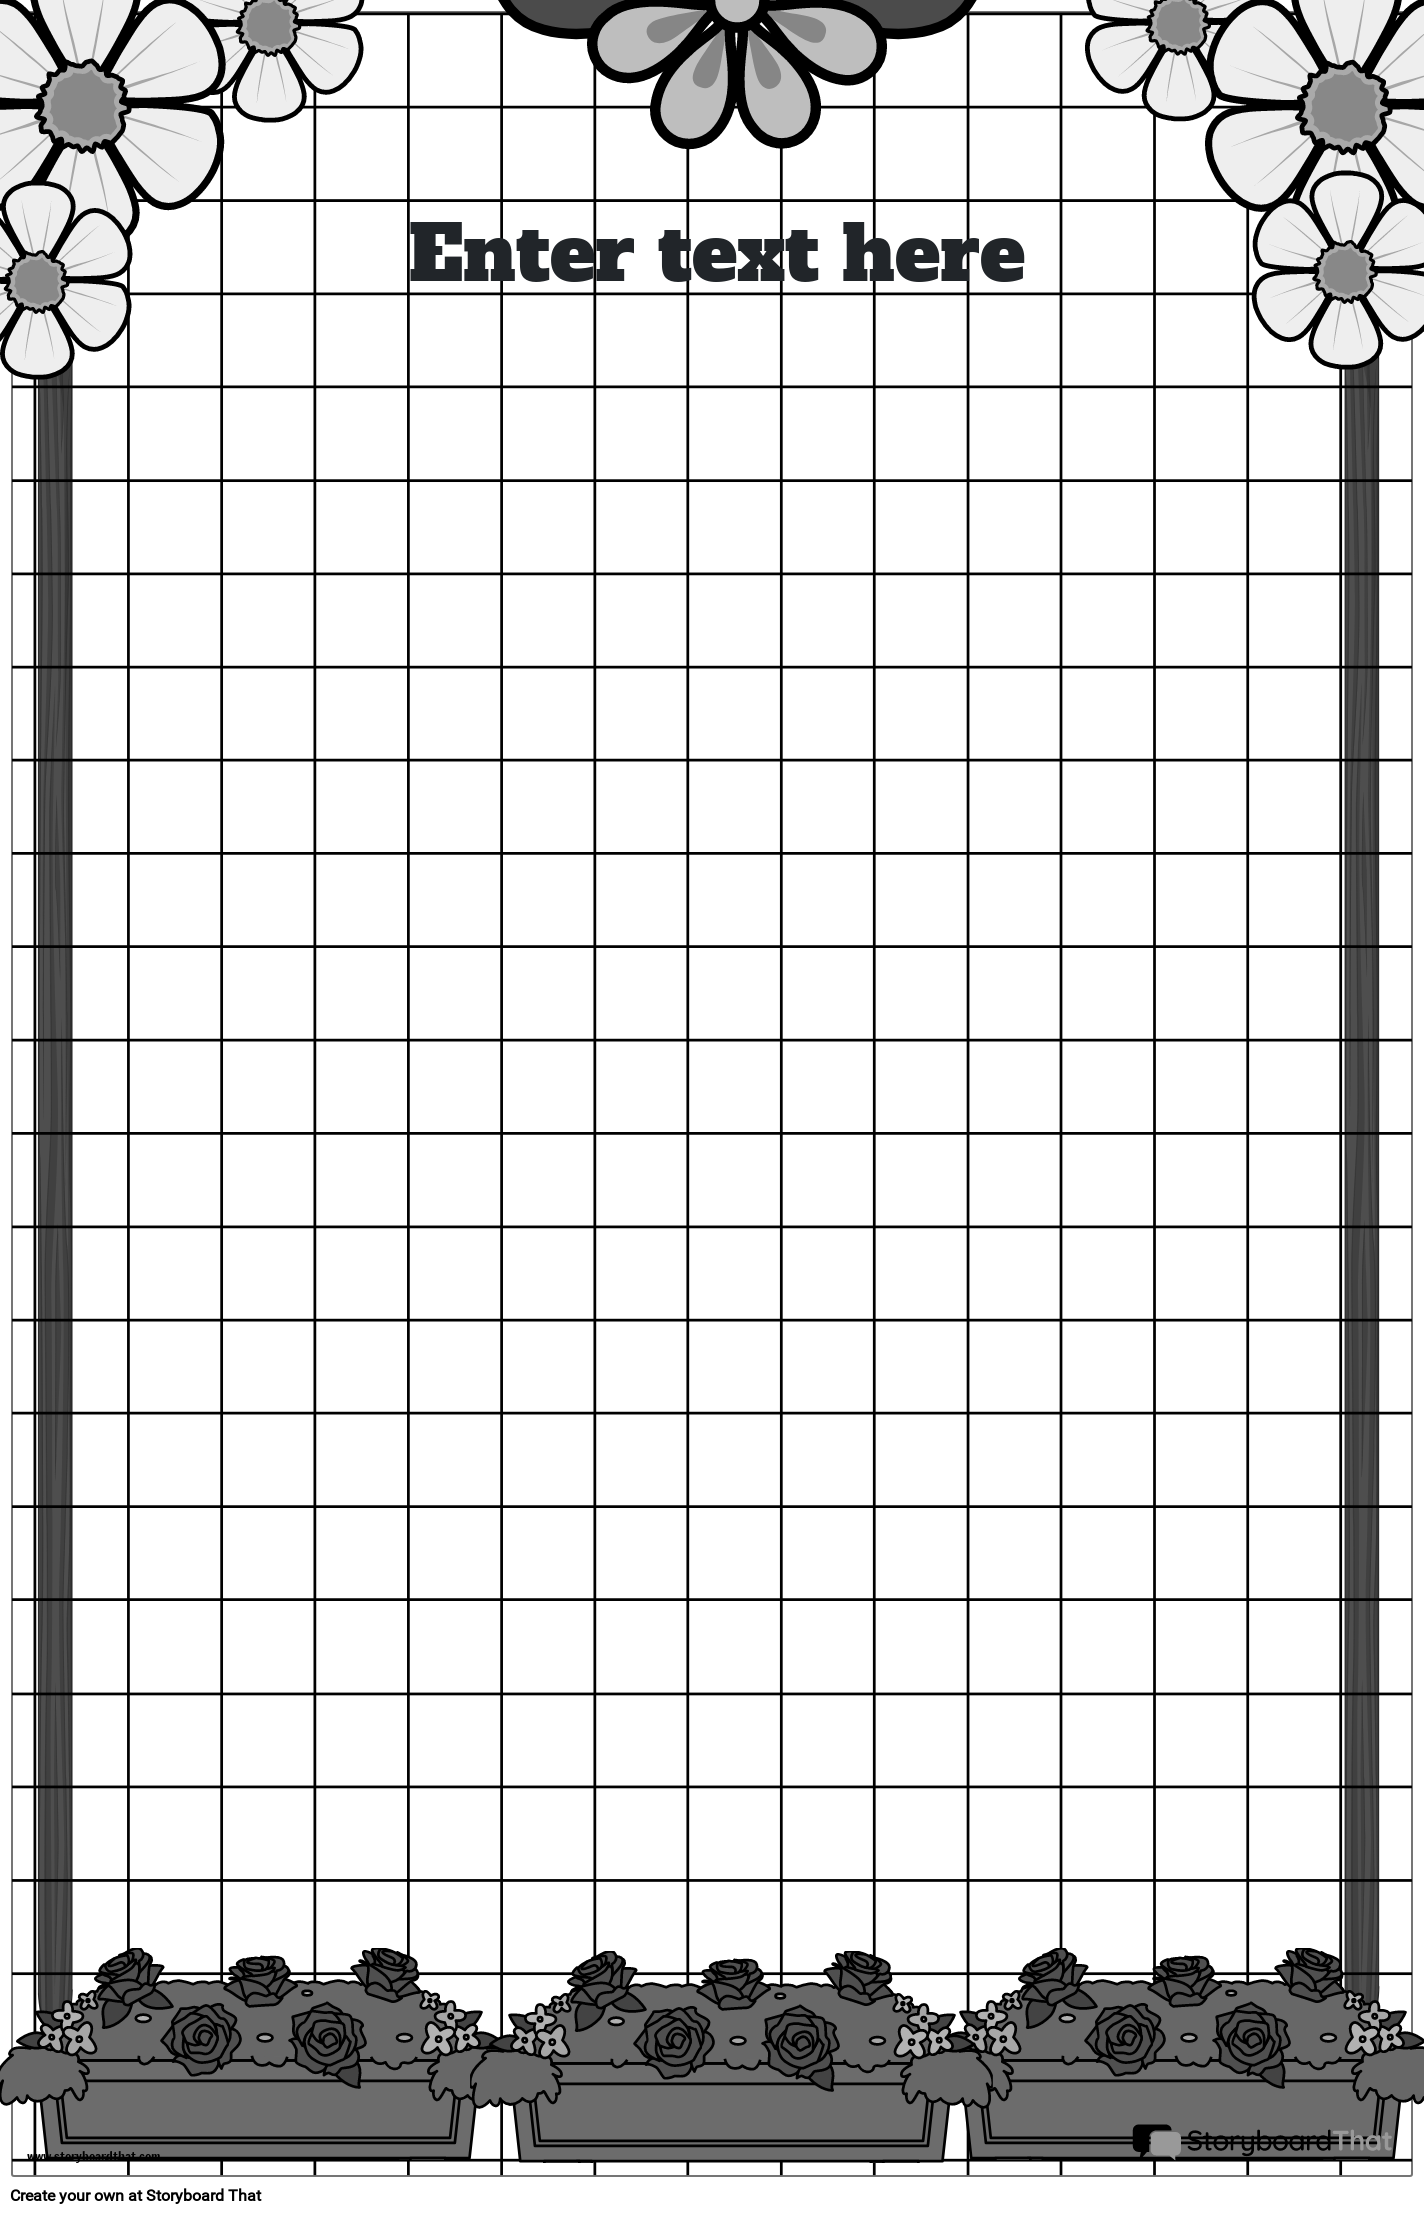 Flower Themed Graphing Paper Poster Black and White